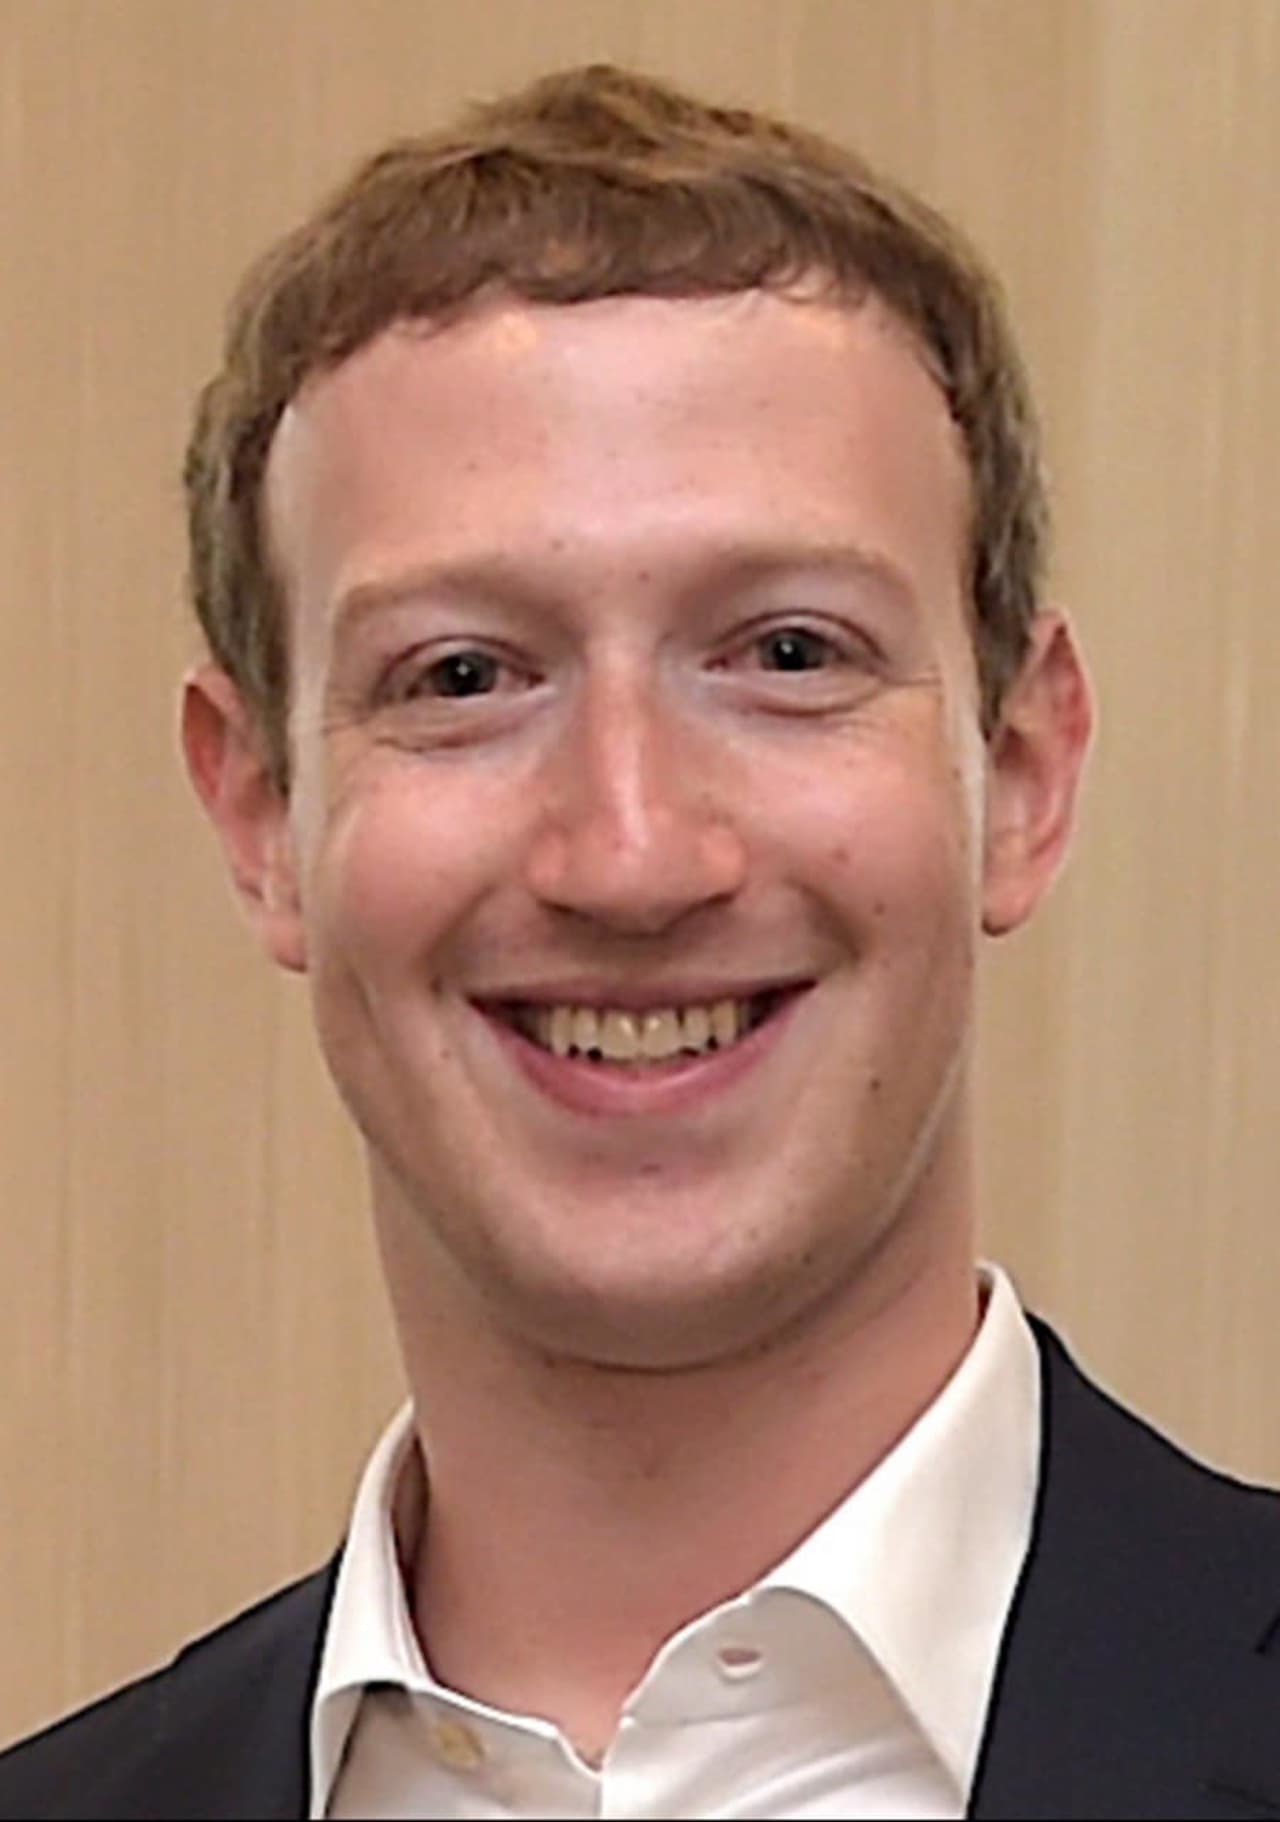 Facebook founder Mark Zuckerberg is White Plains native who grew up in Dobbs Ferry and attended Ardsley High School.